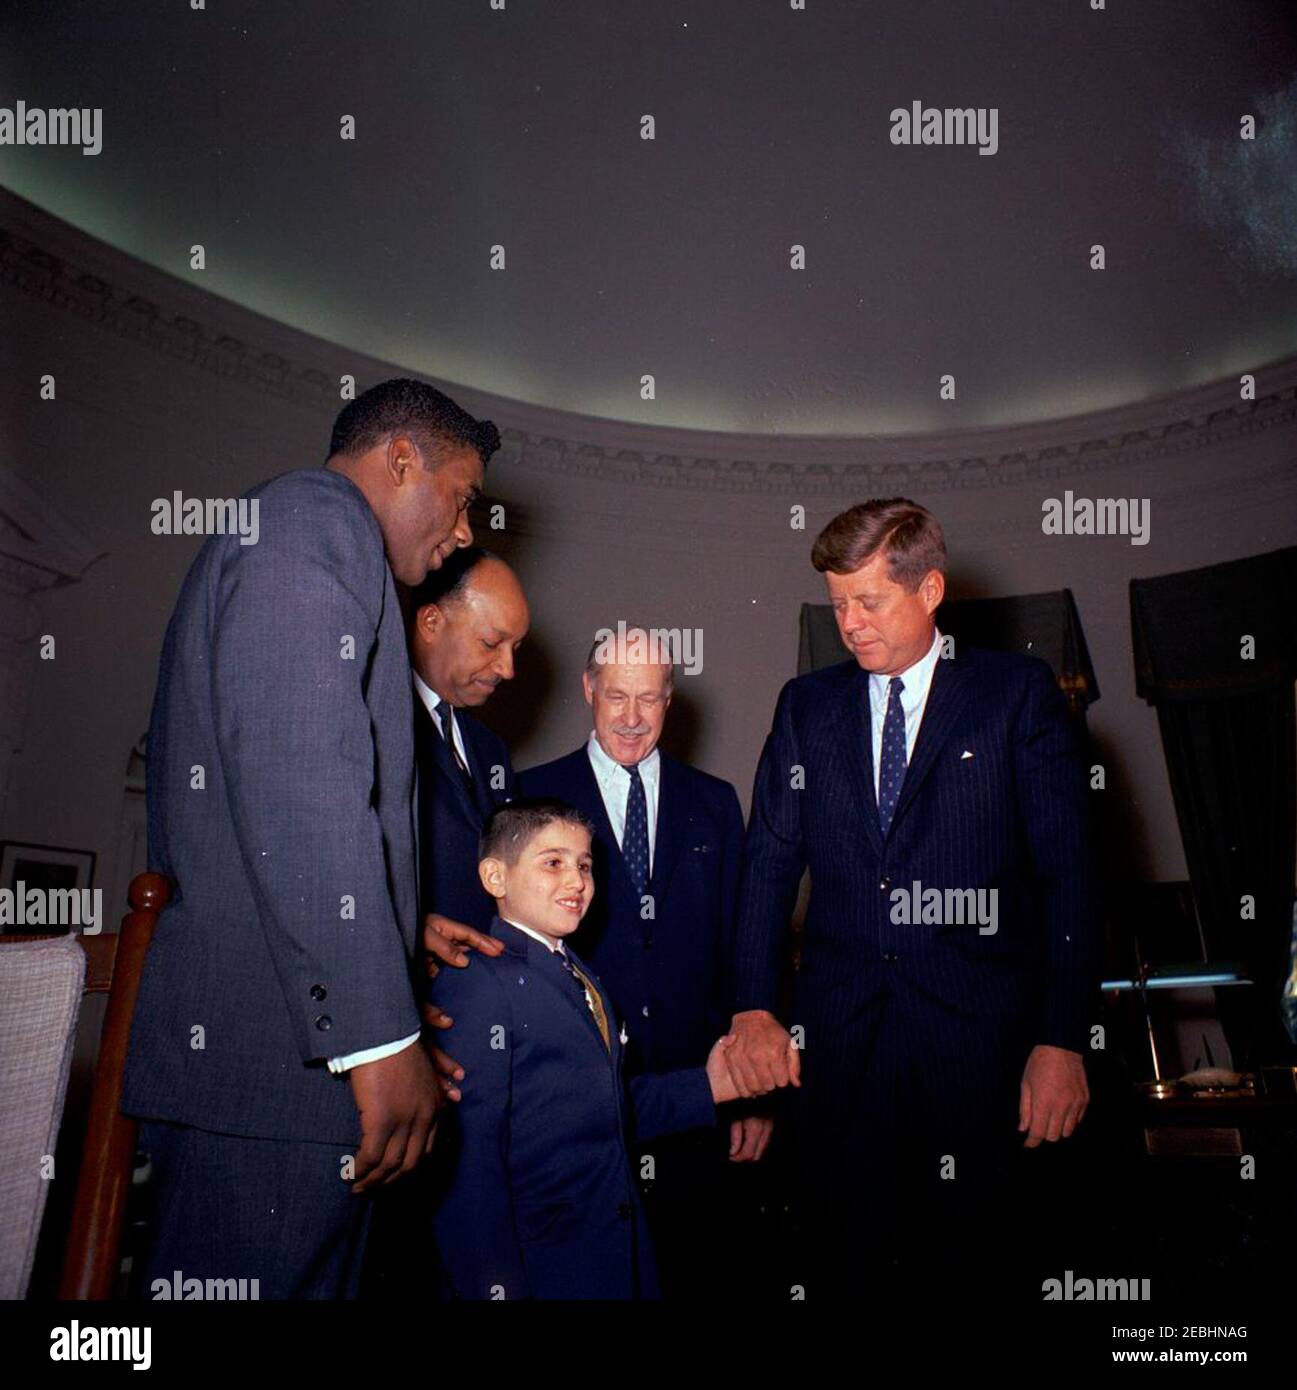 Visit of members of the Big Brothers Association, including Heavyweight Boxing Champion Floyd Patterson, 12:25PM. President John F. Kennedy greets representatives of the Big Brothers Association in connection with Big Brothers Week. The President holds the hand of ten-year-old Freddie Cicala, a u201clittle brotheru201d member of the Big Brothers organization. Looking on are (L-R): World heavyweight boxing champion Floyd Patterson; John Duncan, member of the District of Columbia Board of Commissioners; and journalist Drew Pearson. Oval Office, White House, Washington, D.C. Stock Photo